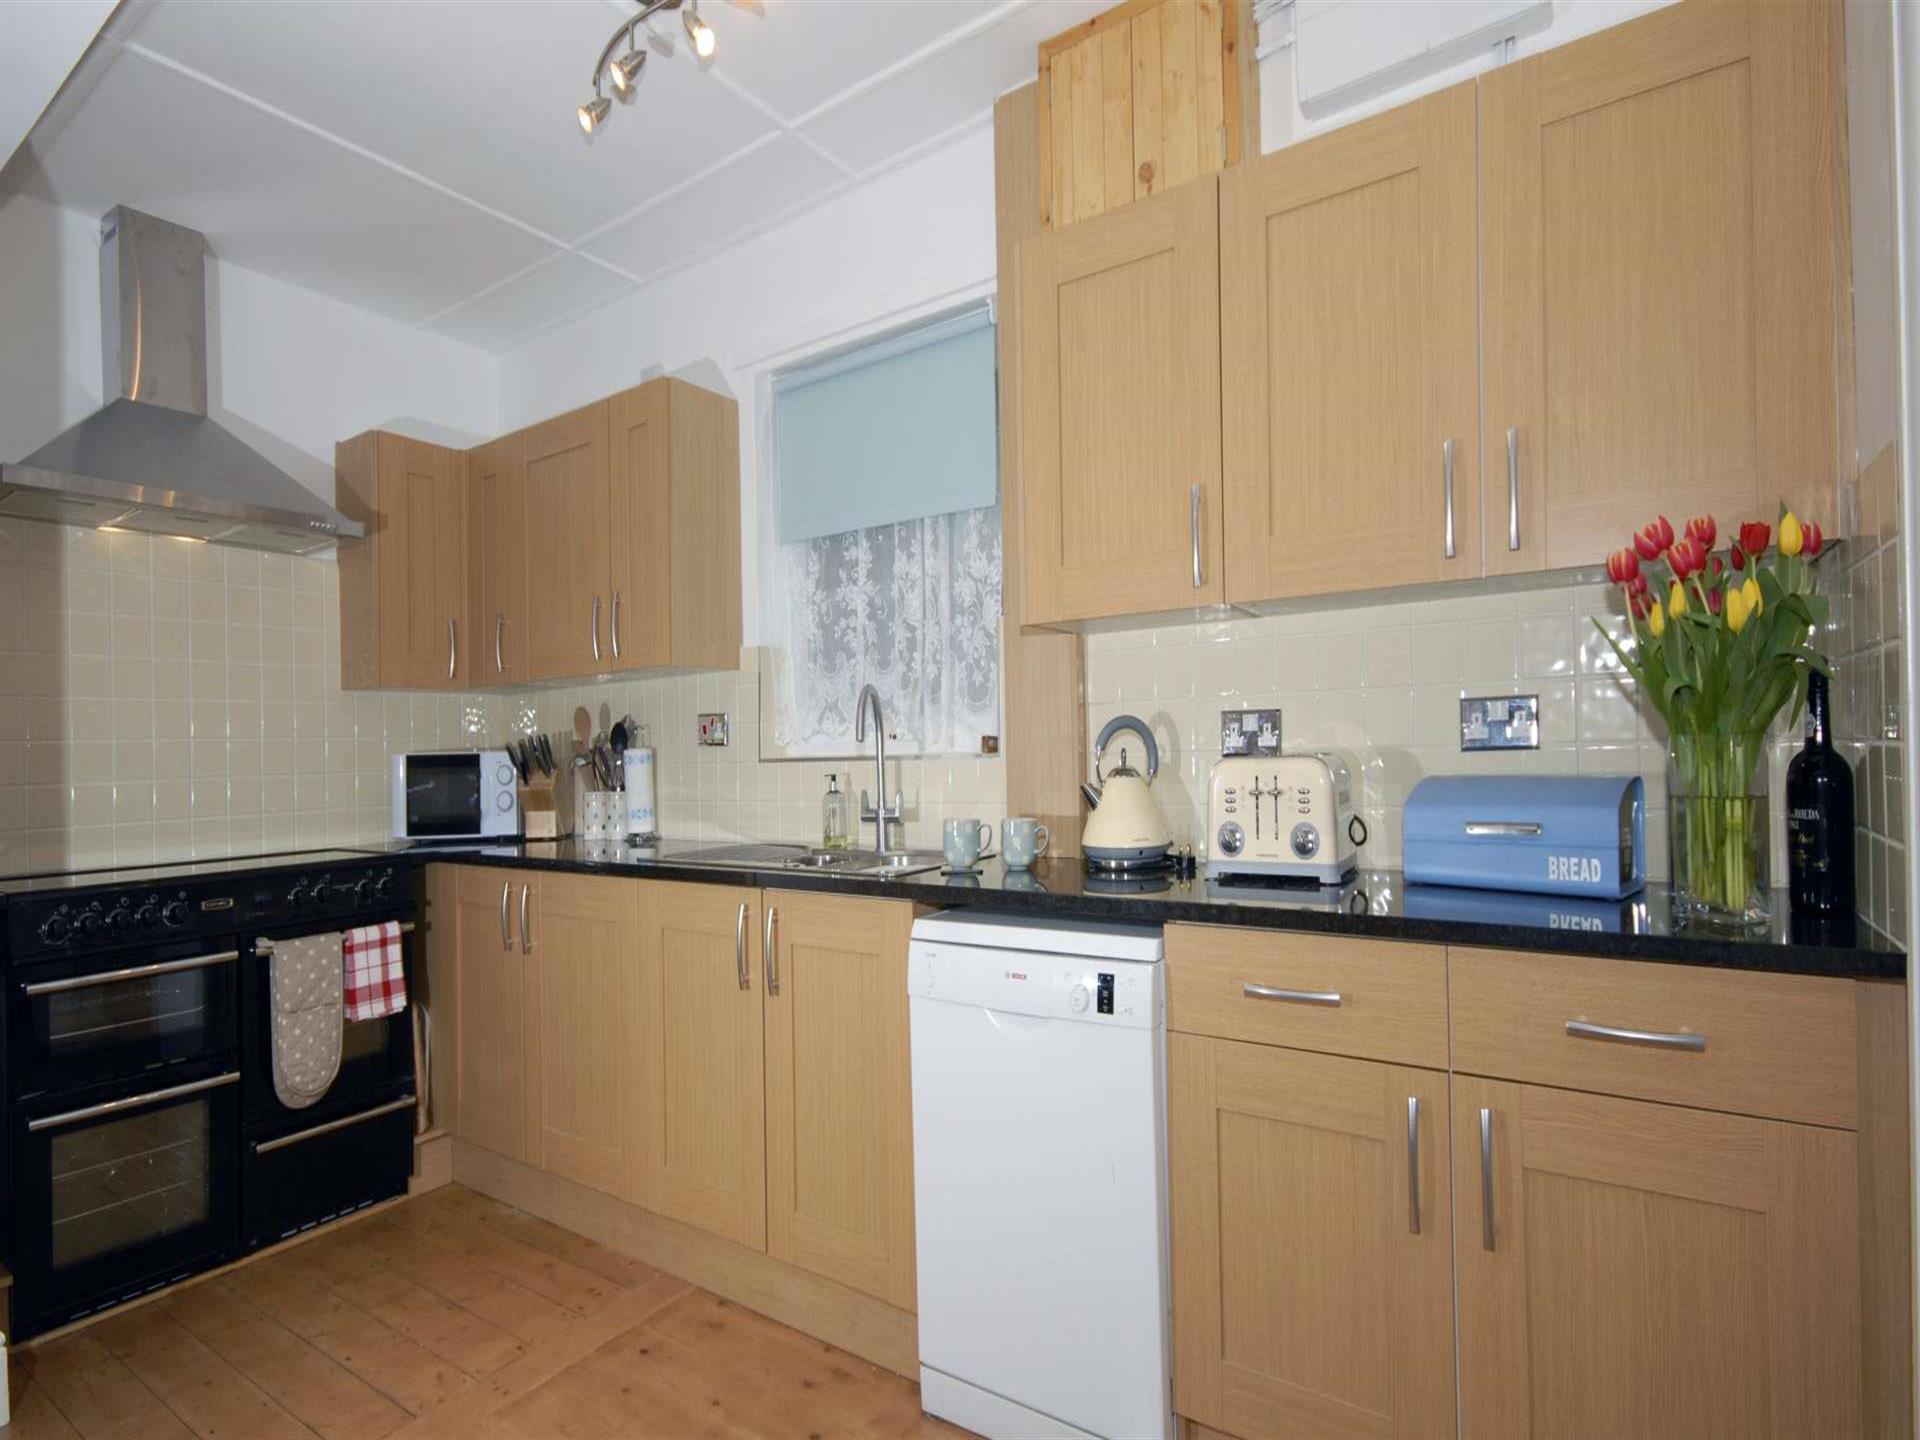 New Quay, Cardiganshire self-catering holiday hous